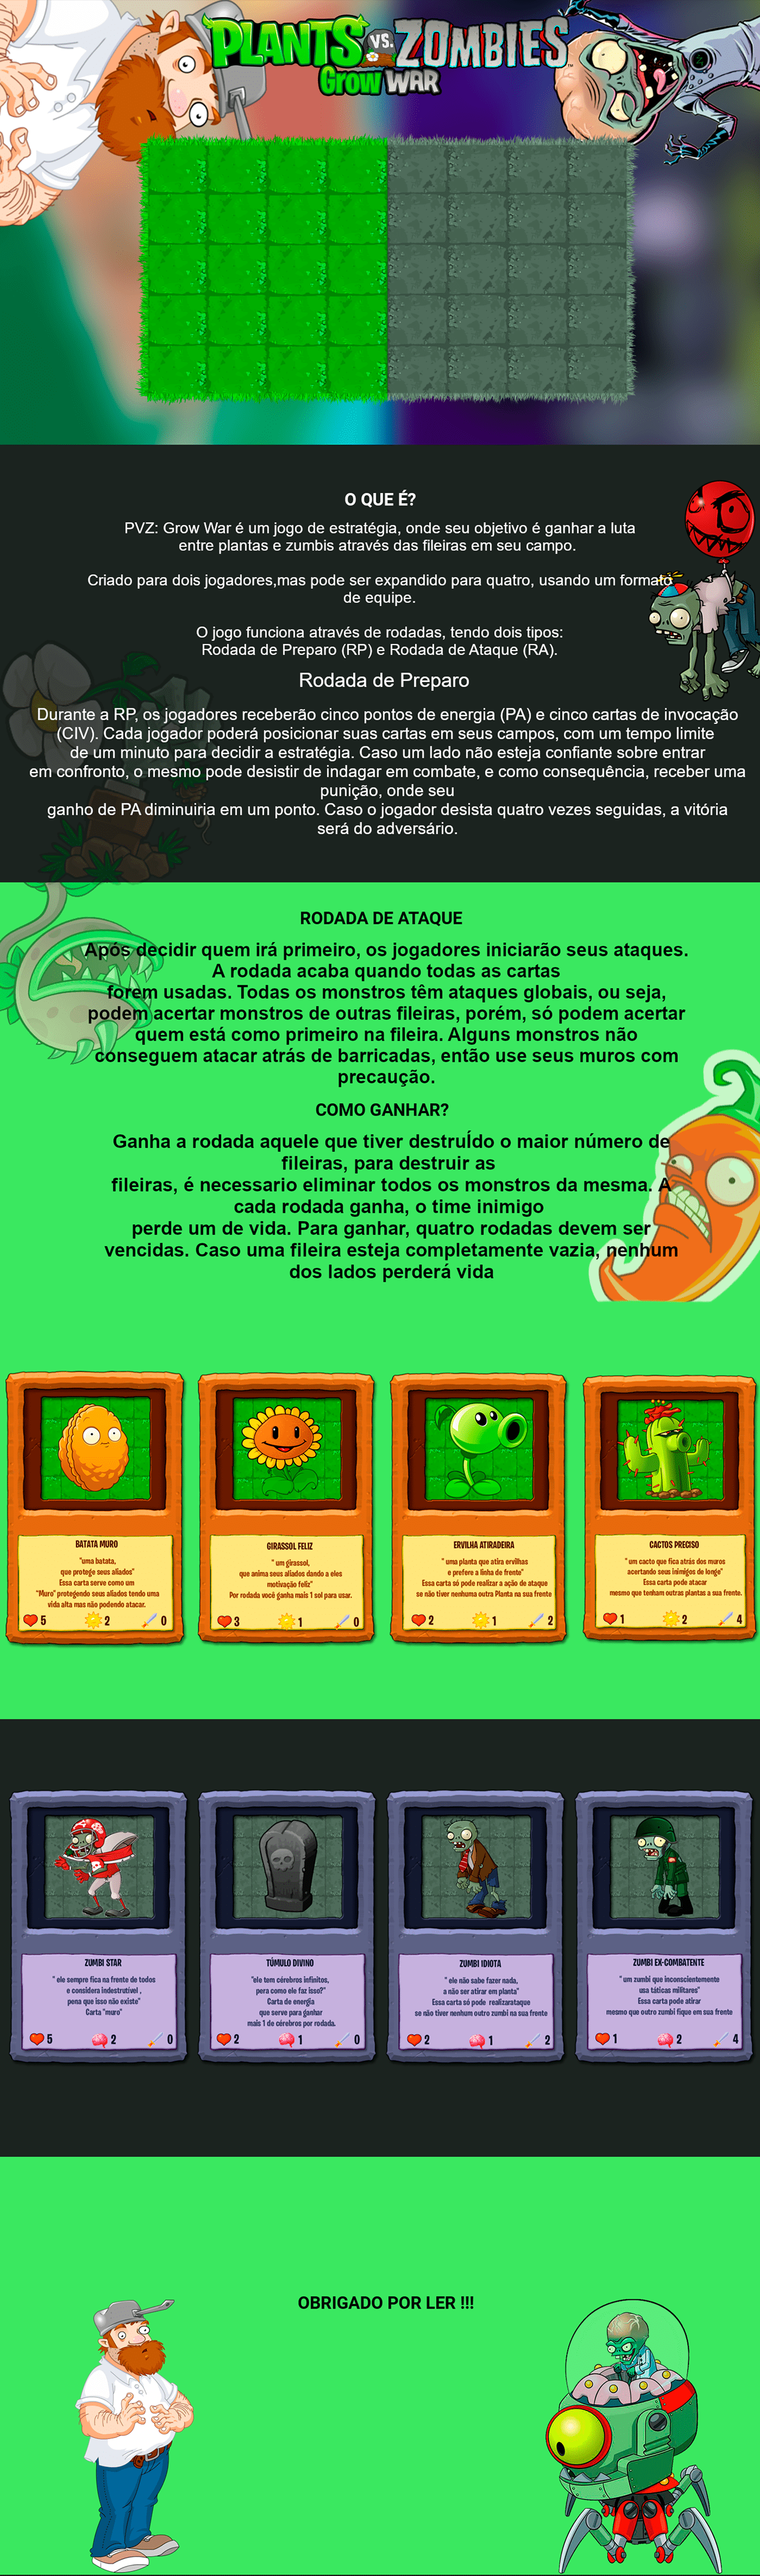 card game card game idea cards game grow war ideas plants plants vs zombies PopCap zombies